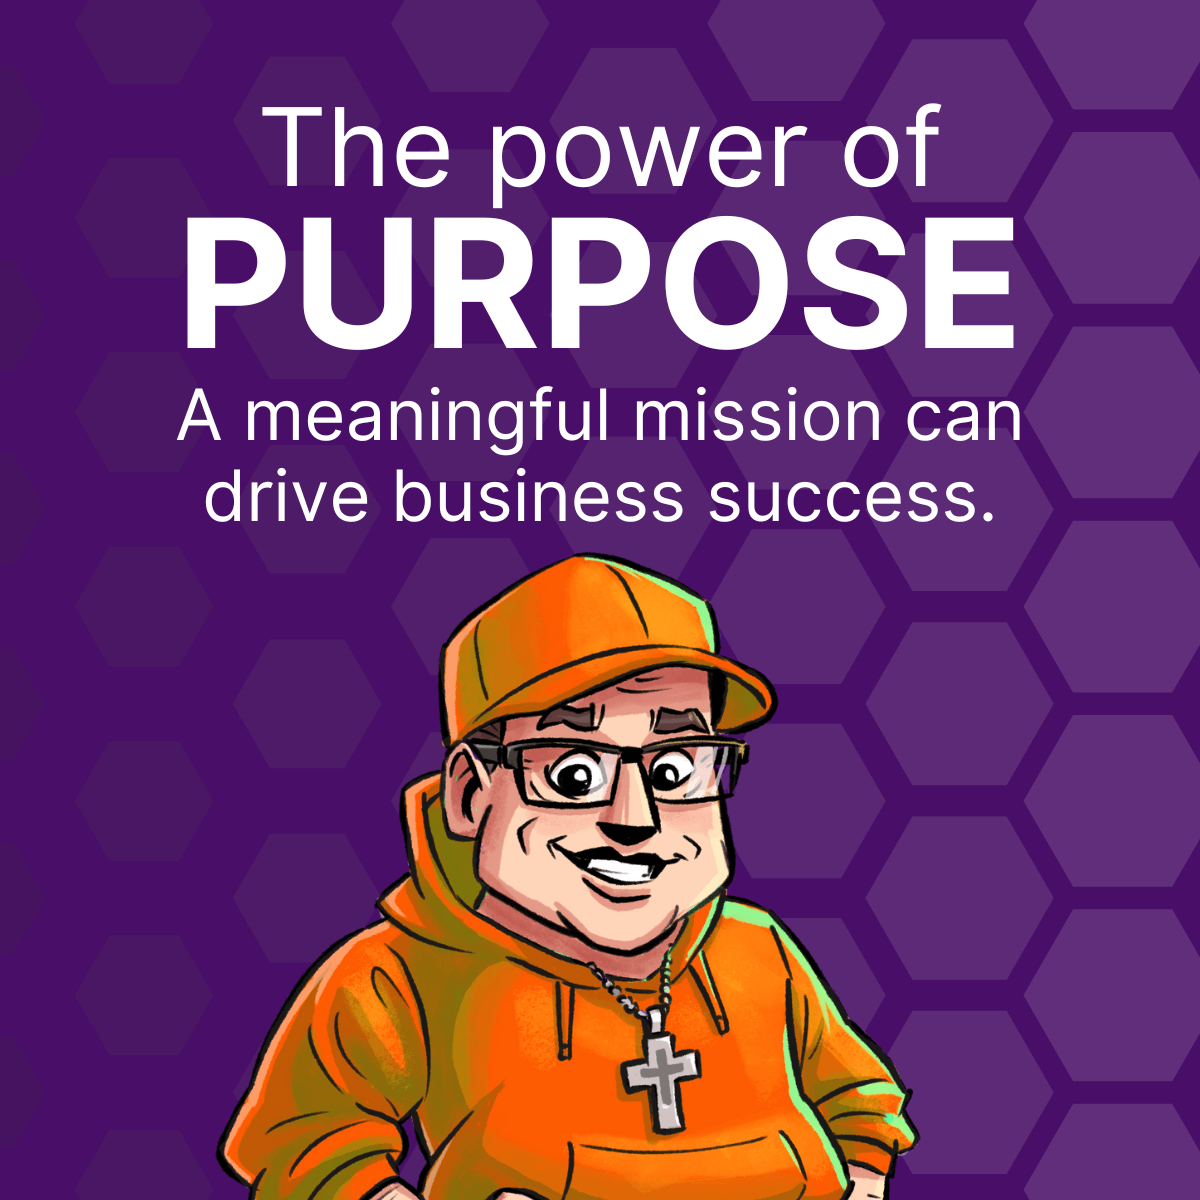 The Power of Purpose: How Having a Meaningful Mission Drives Business Success